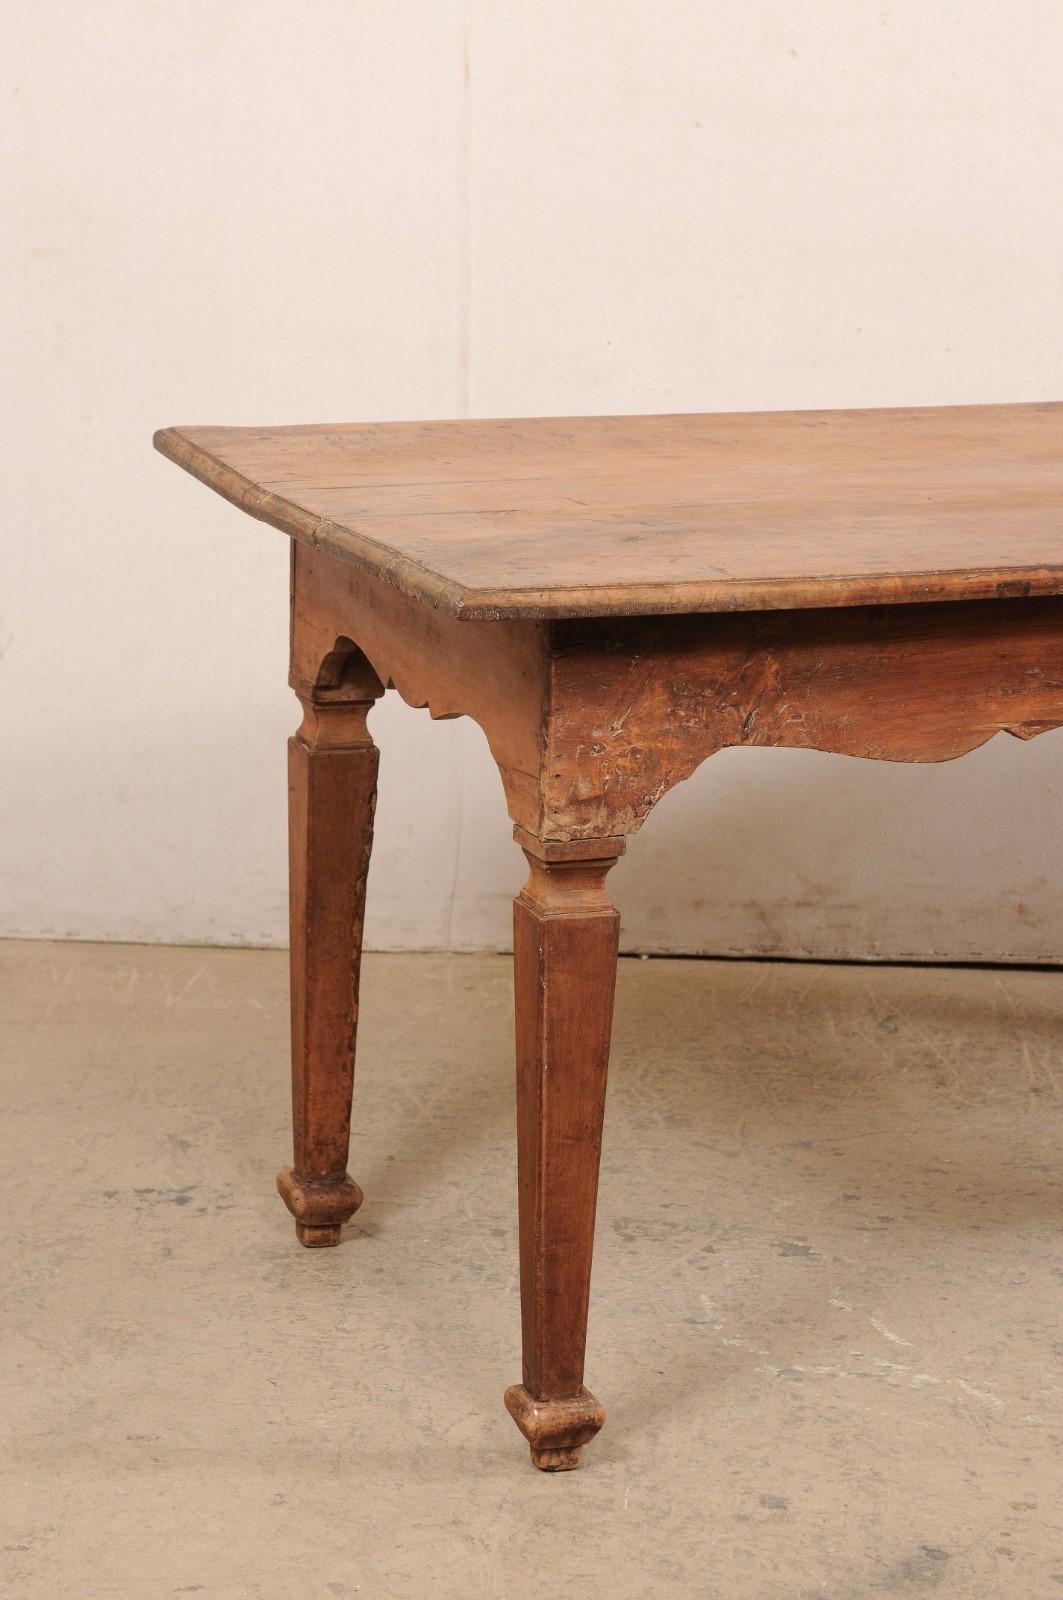 A Late 18th C. Italian Walnut Farm Table with Carved Skirt, 6 Ft Long In Good Condition For Sale In Atlanta, GA